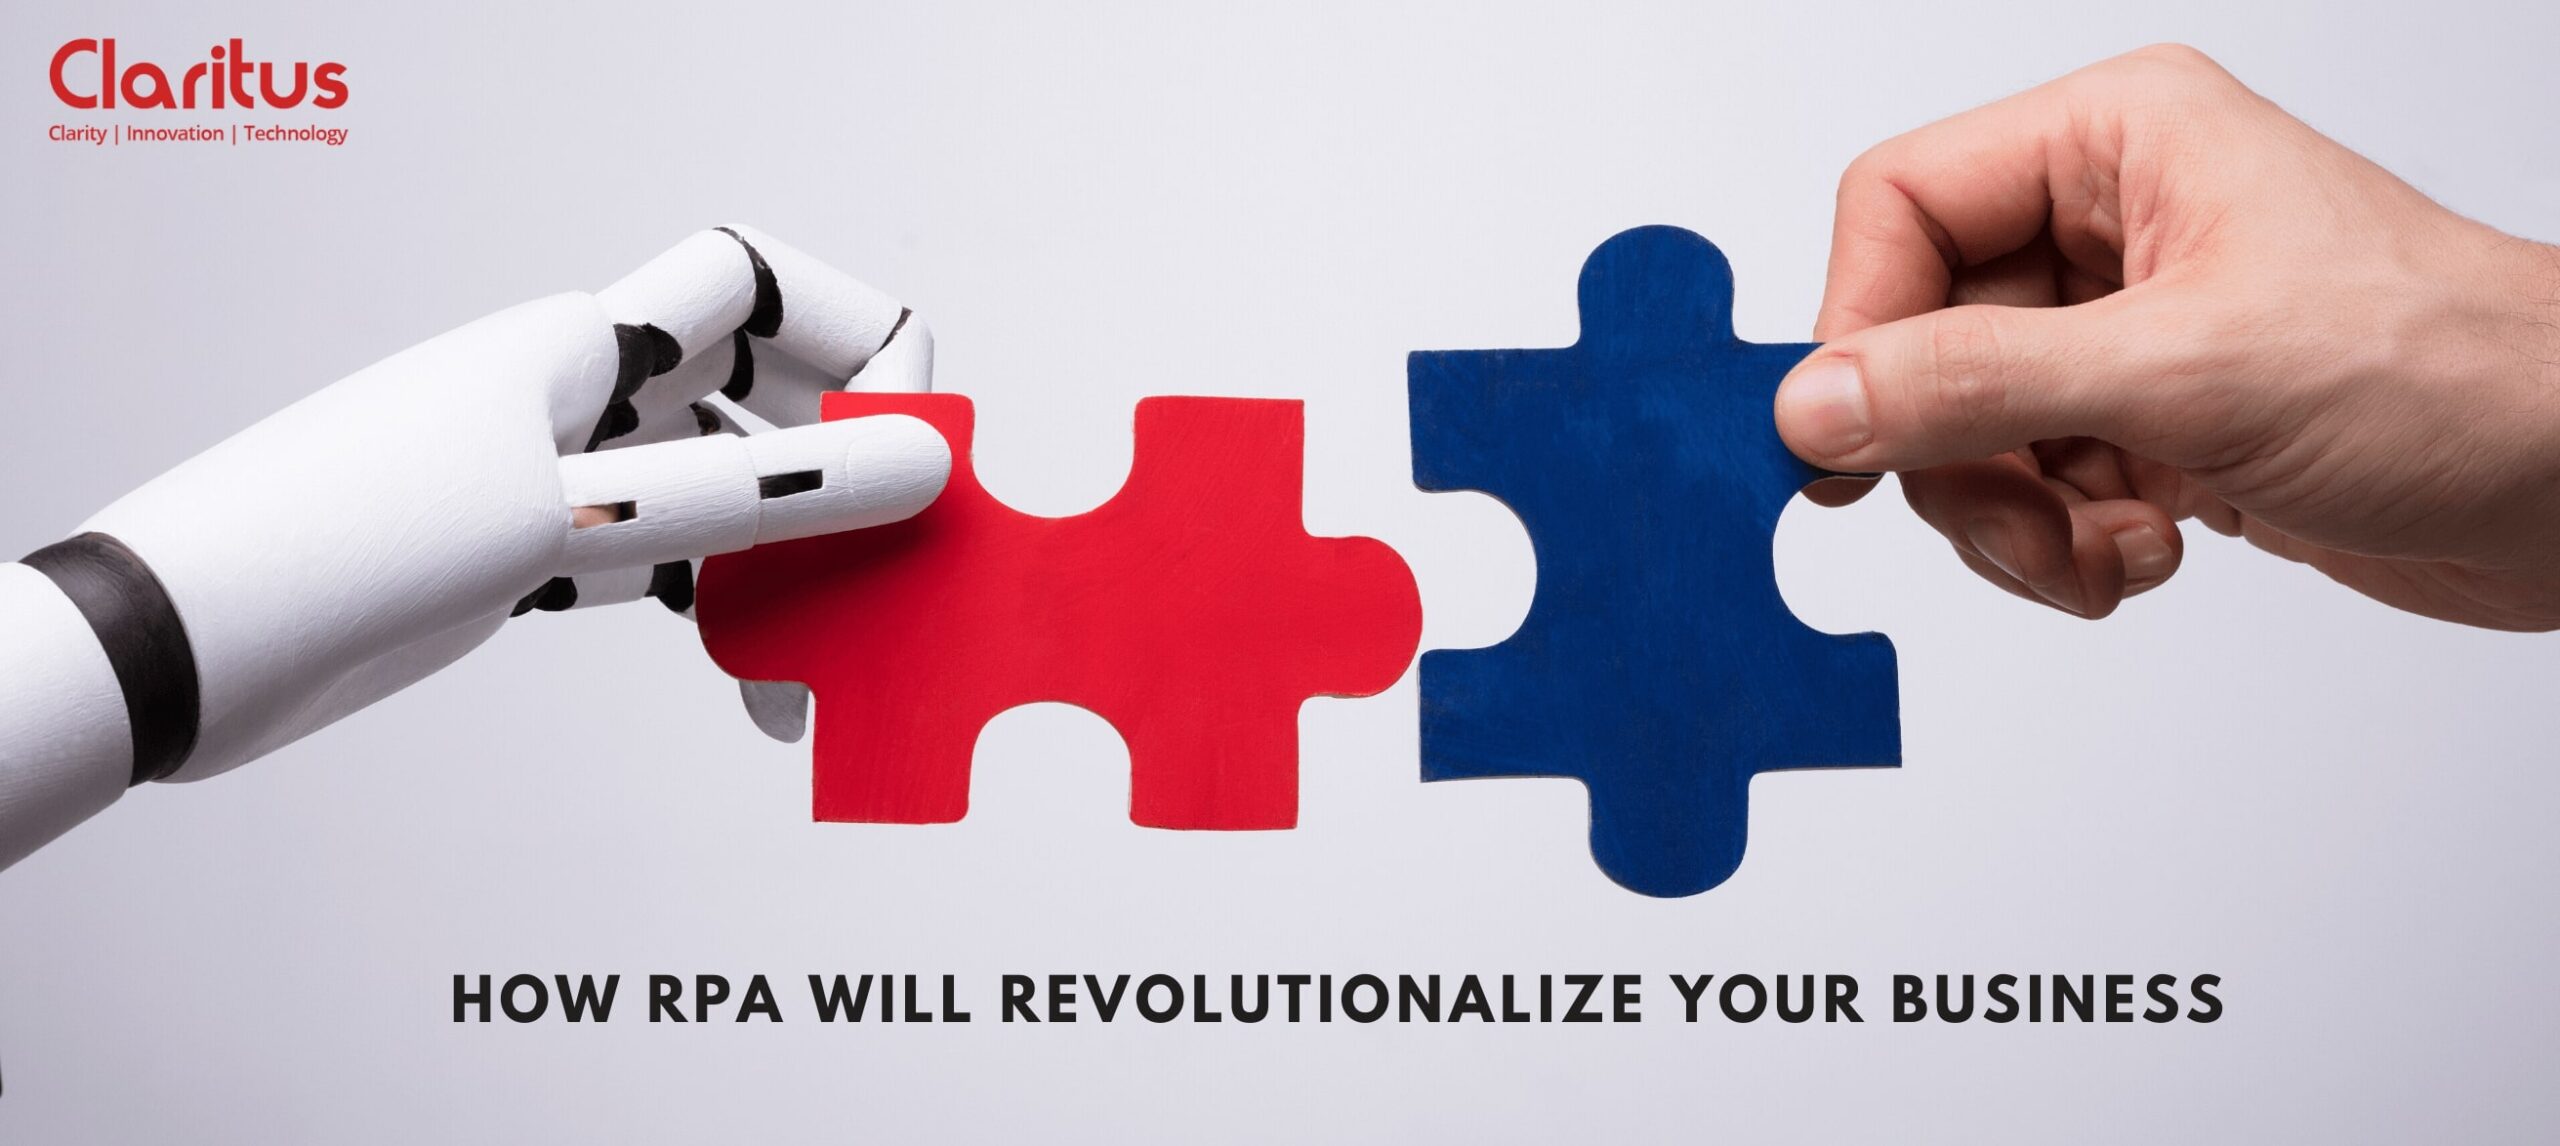 How RPA shall revolutionalize your business 1 scaled